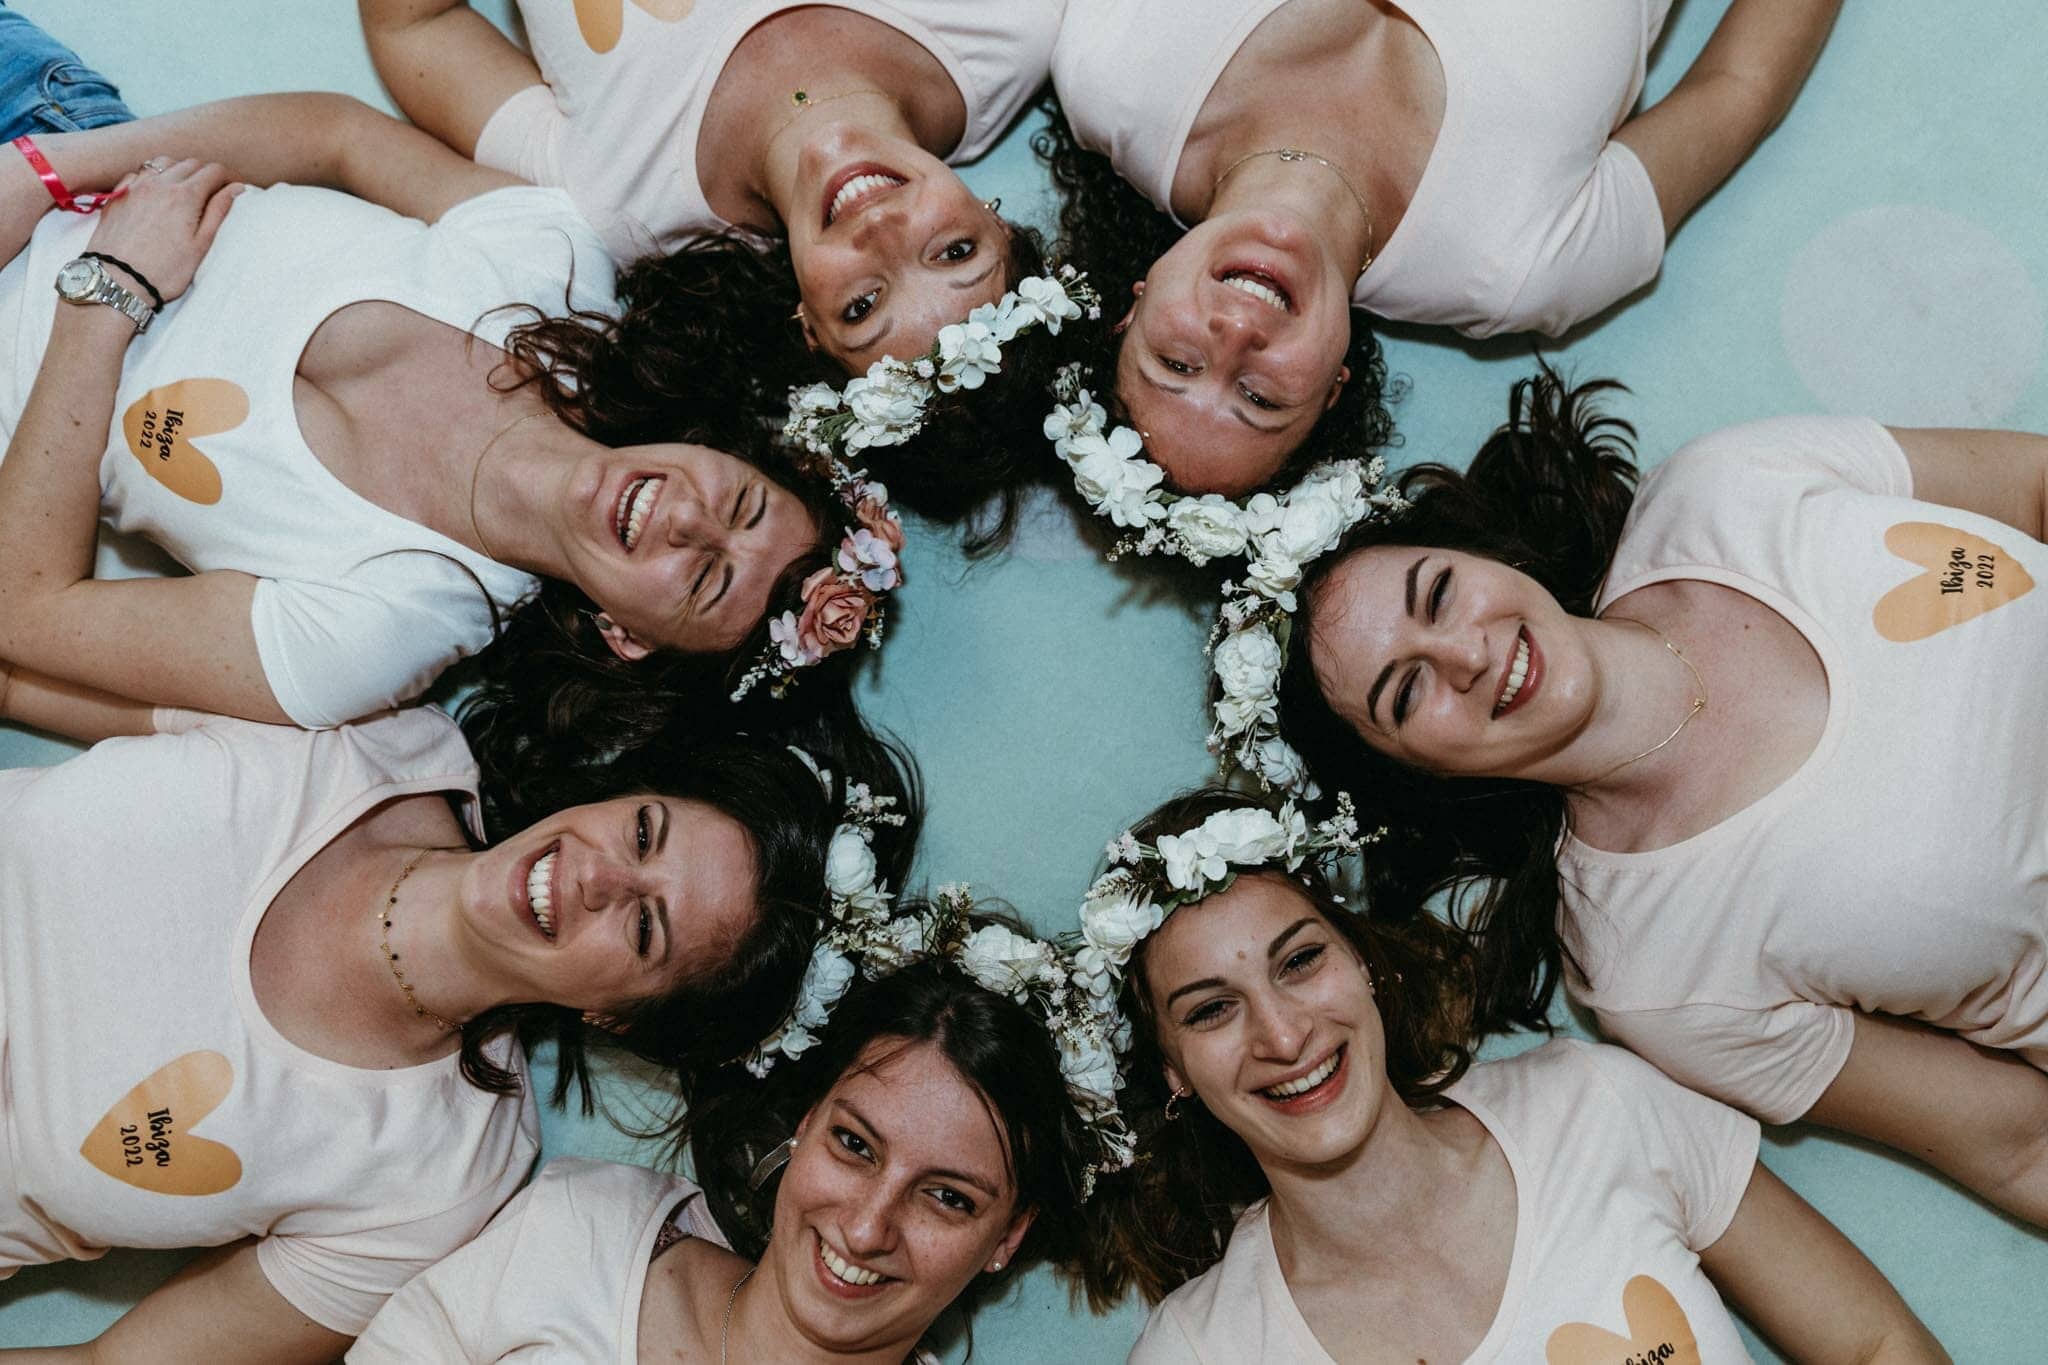 image of photo of friends with flower crown in their hair